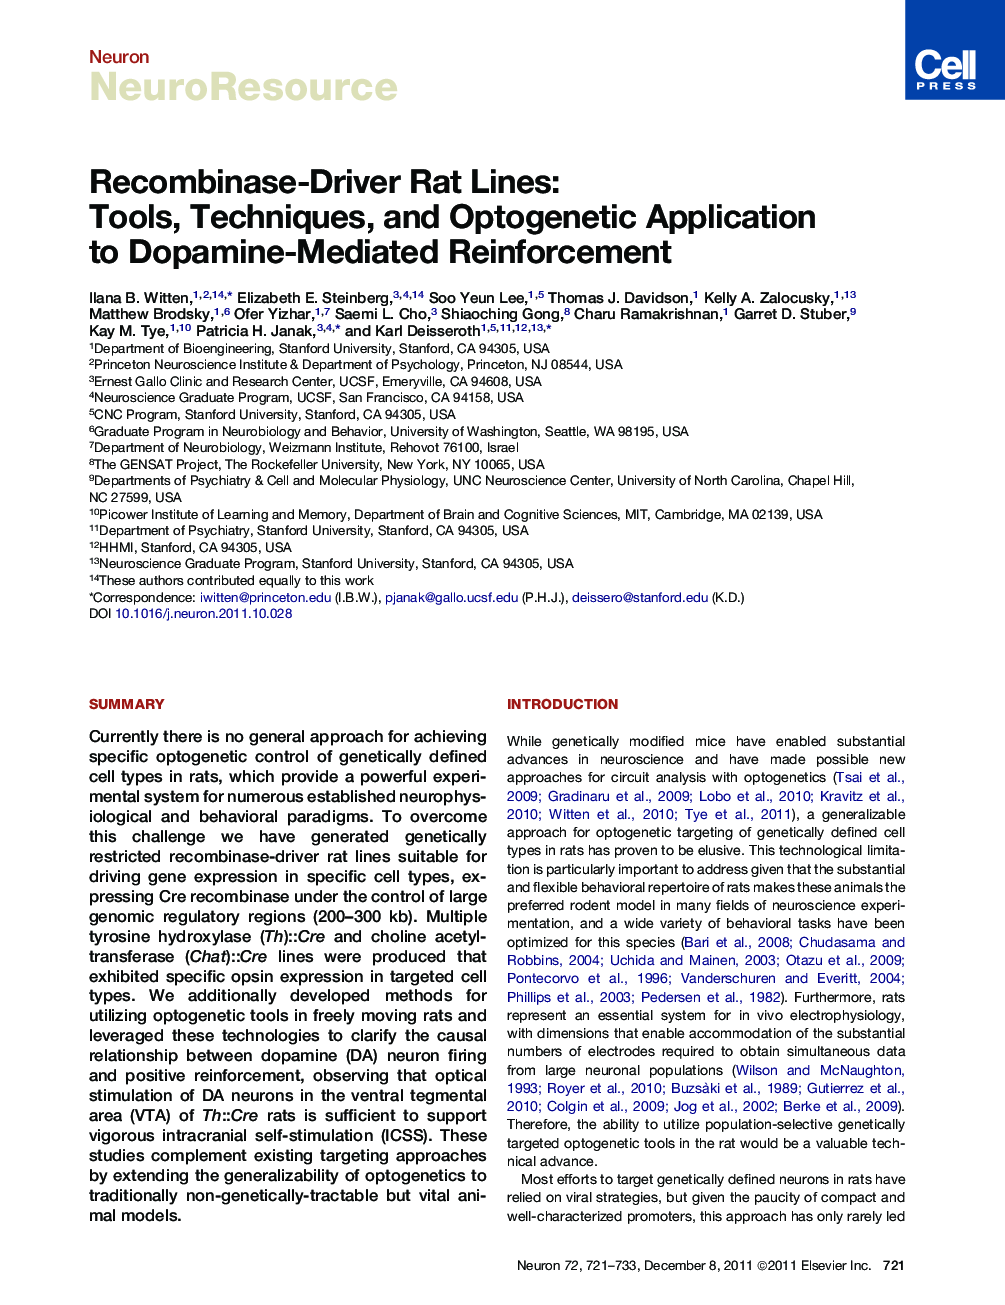 Recombinase-Driver Rat Lines: Tools, Techniques, and Optogenetic Application to Dopamine-Mediated Reinforcement